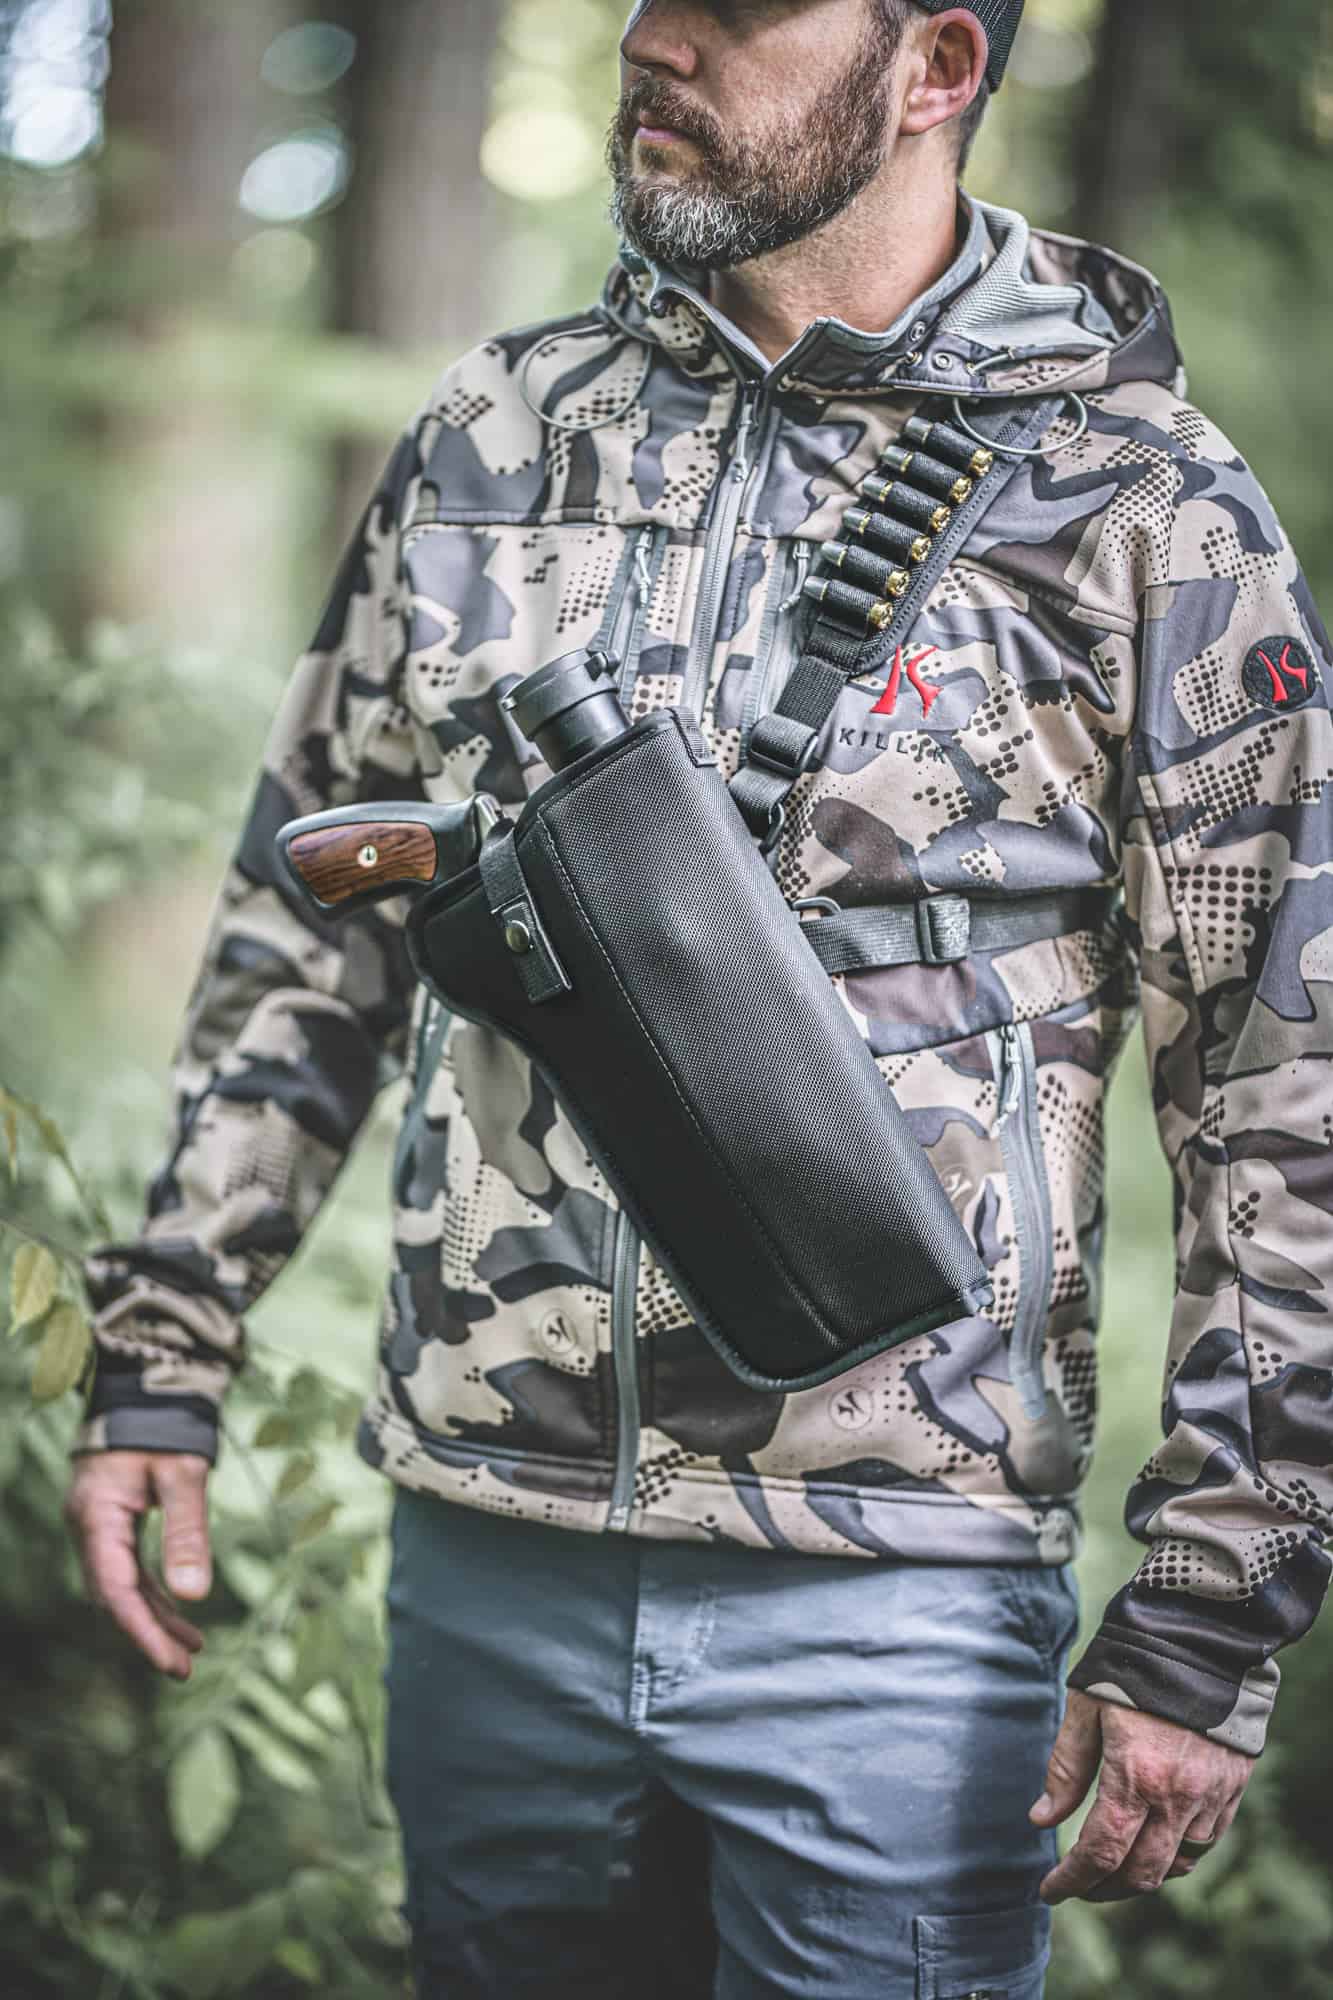 3. Key factors to consider when selecting a hunting holster